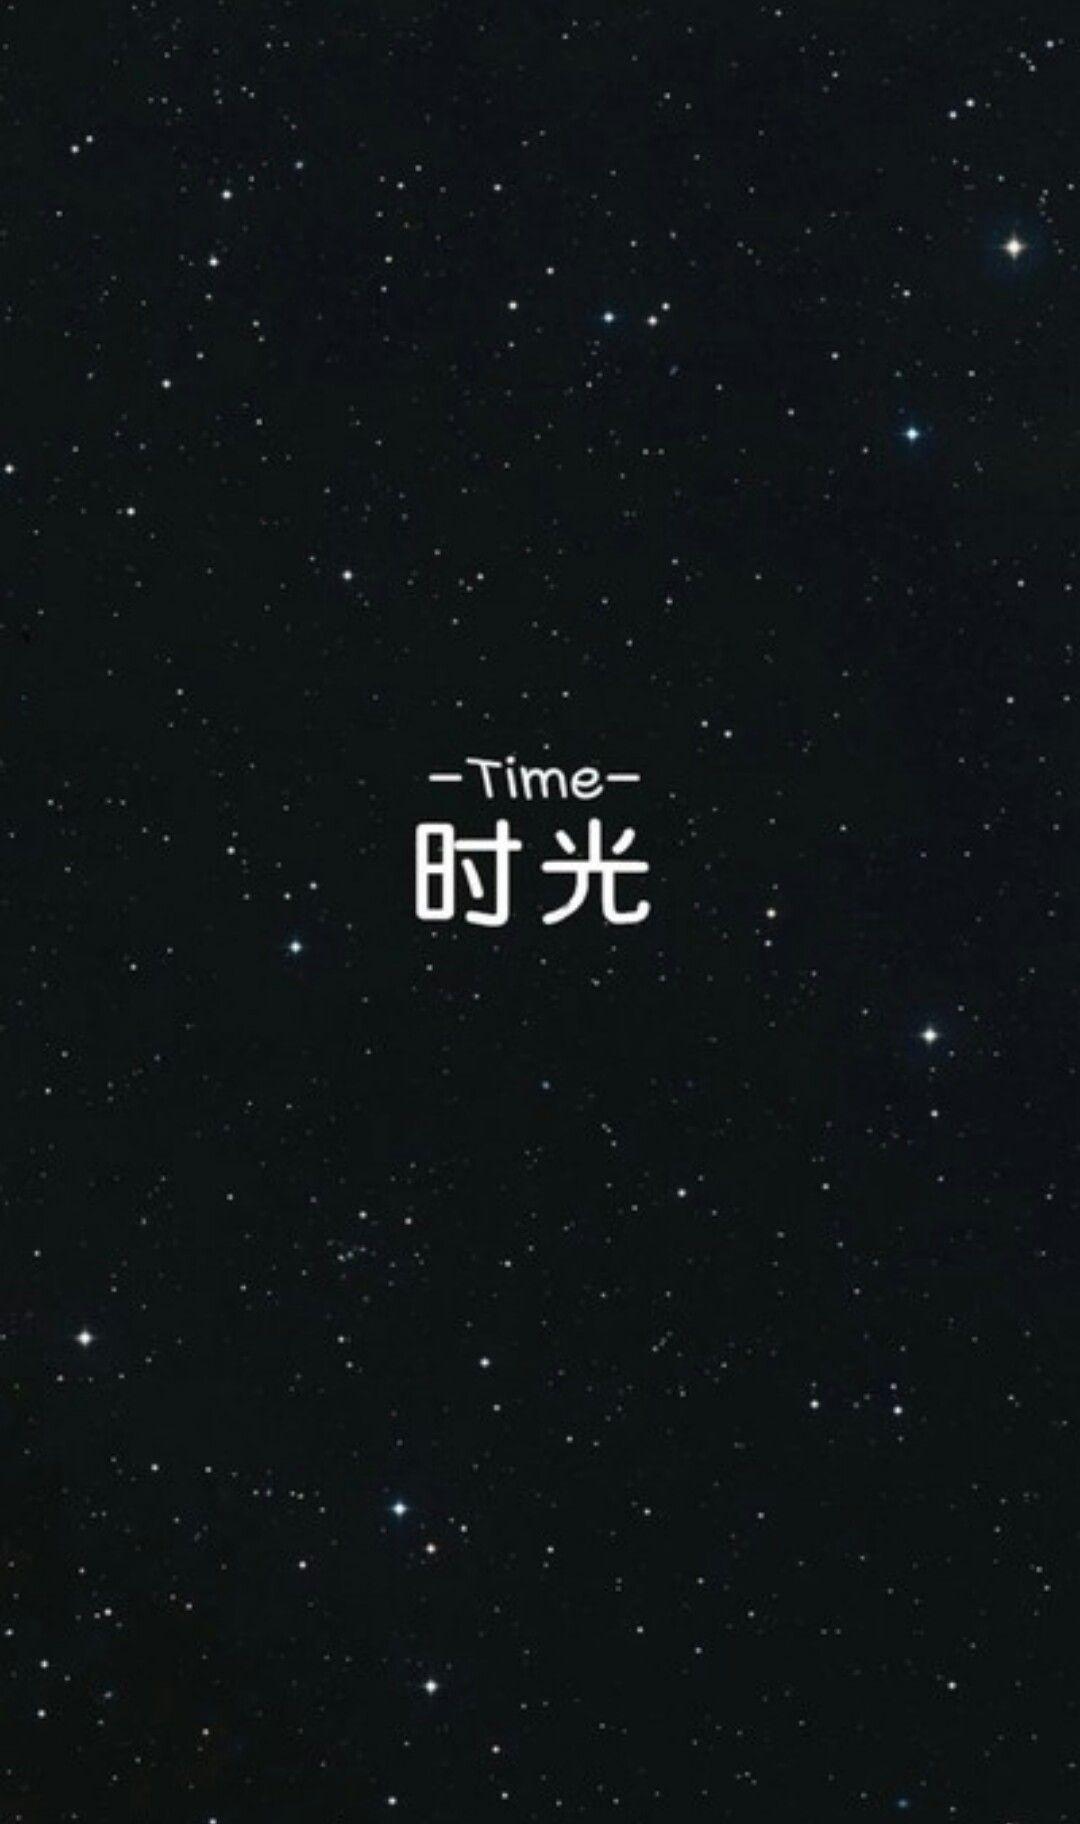 linaphat Stars Time Chinese Wallpaper. Chinese wallpaper, Words wallpaper, Japanese quotes